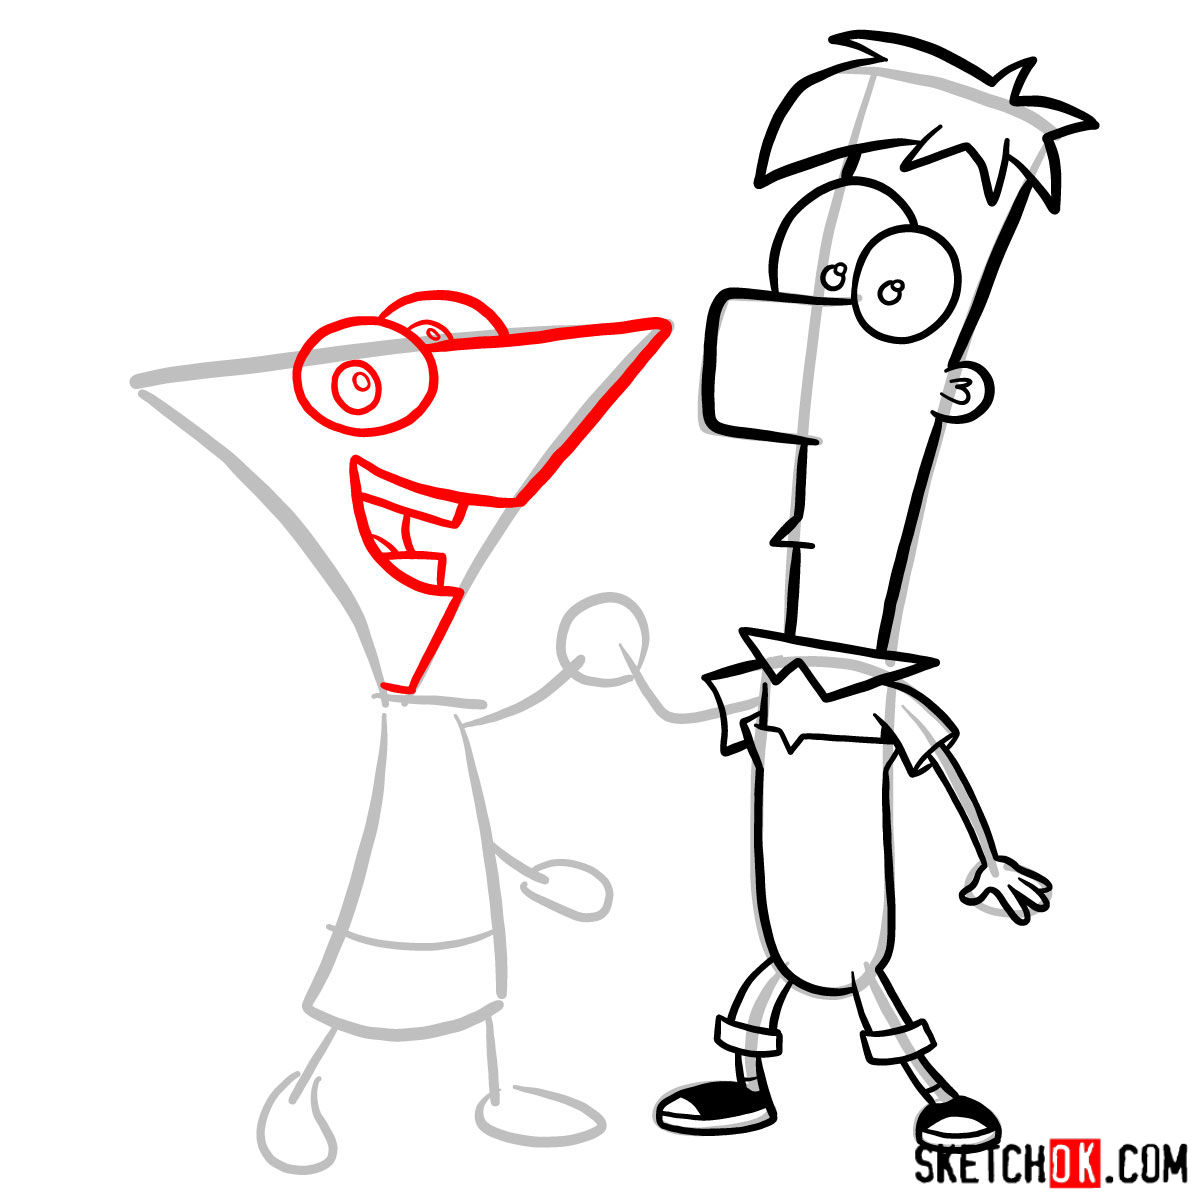 How to draw Phineas and Ferb - step 09